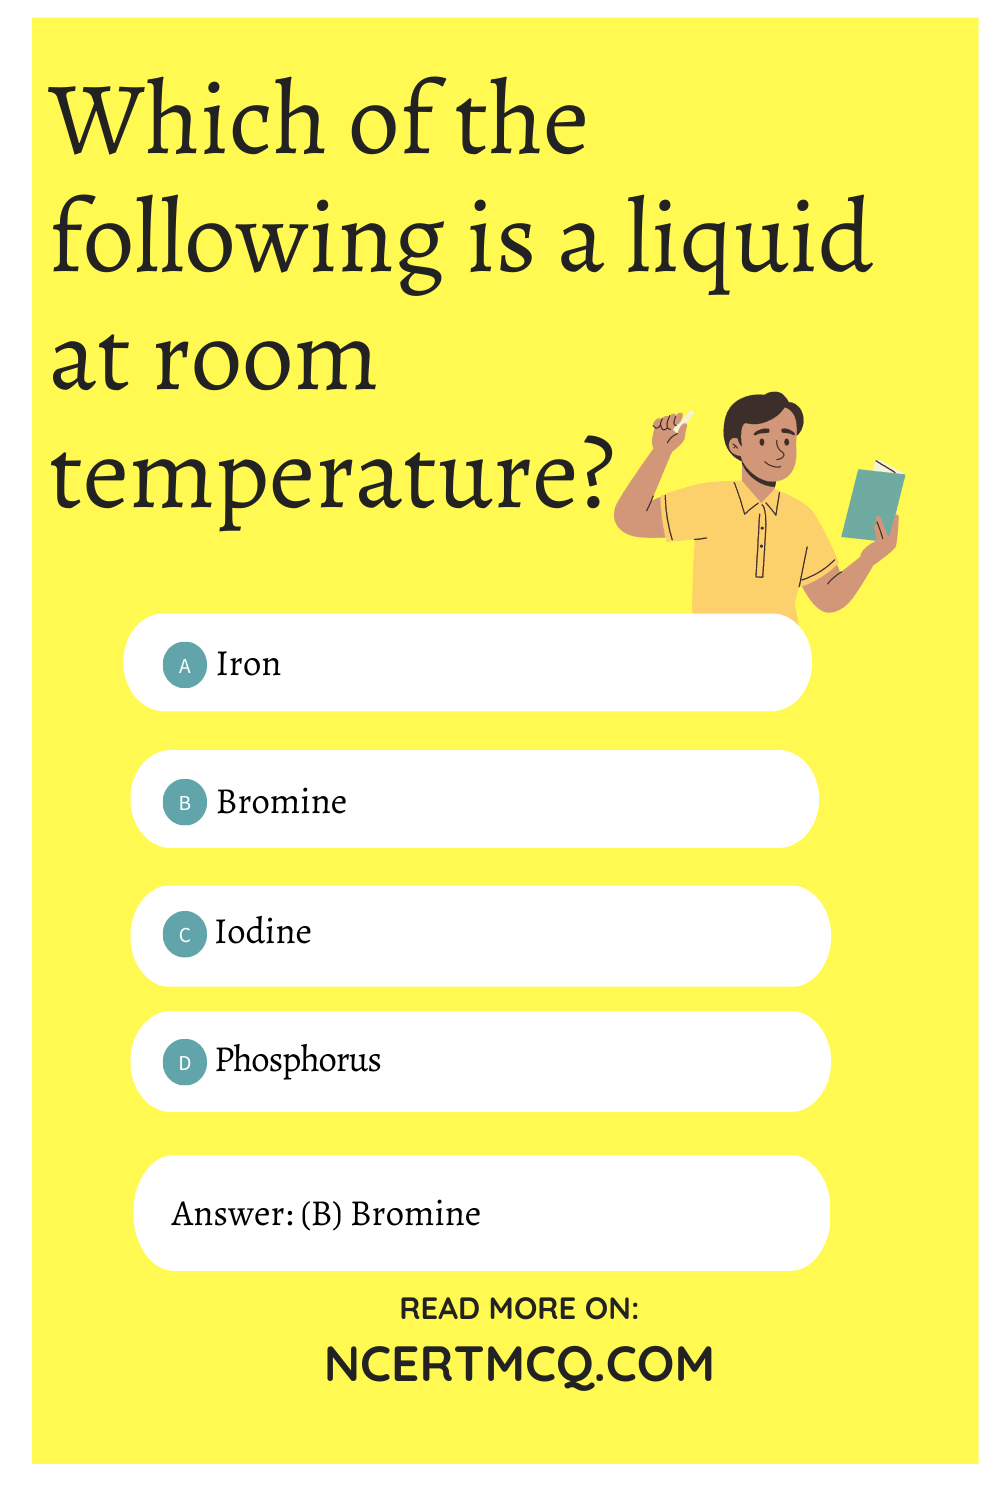 Which of the following is a liquid at room temperature?